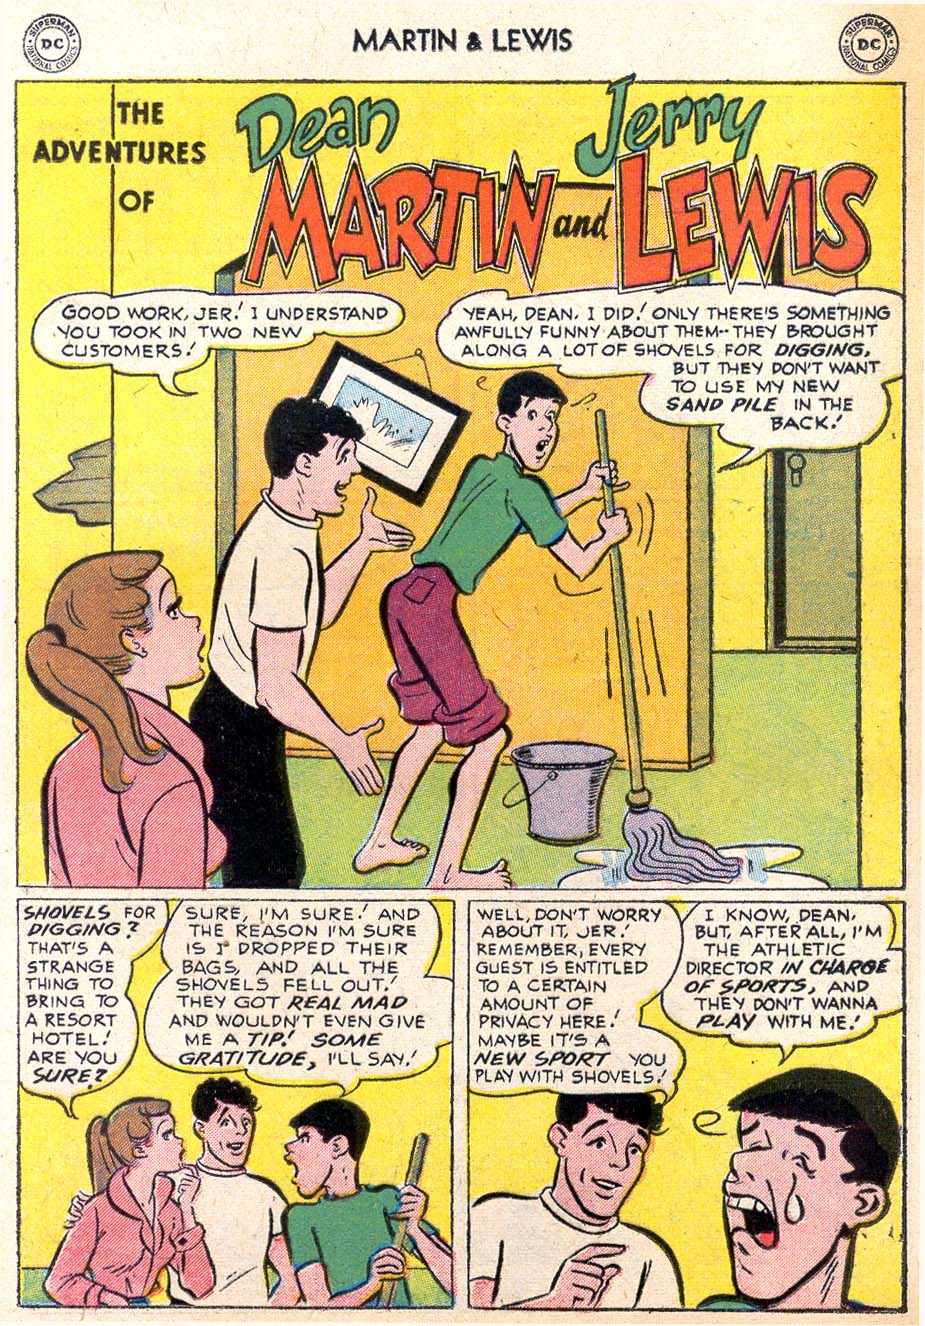 Read online The Adventures of Dean Martin and Jerry Lewis comic -  Issue #26 - 13